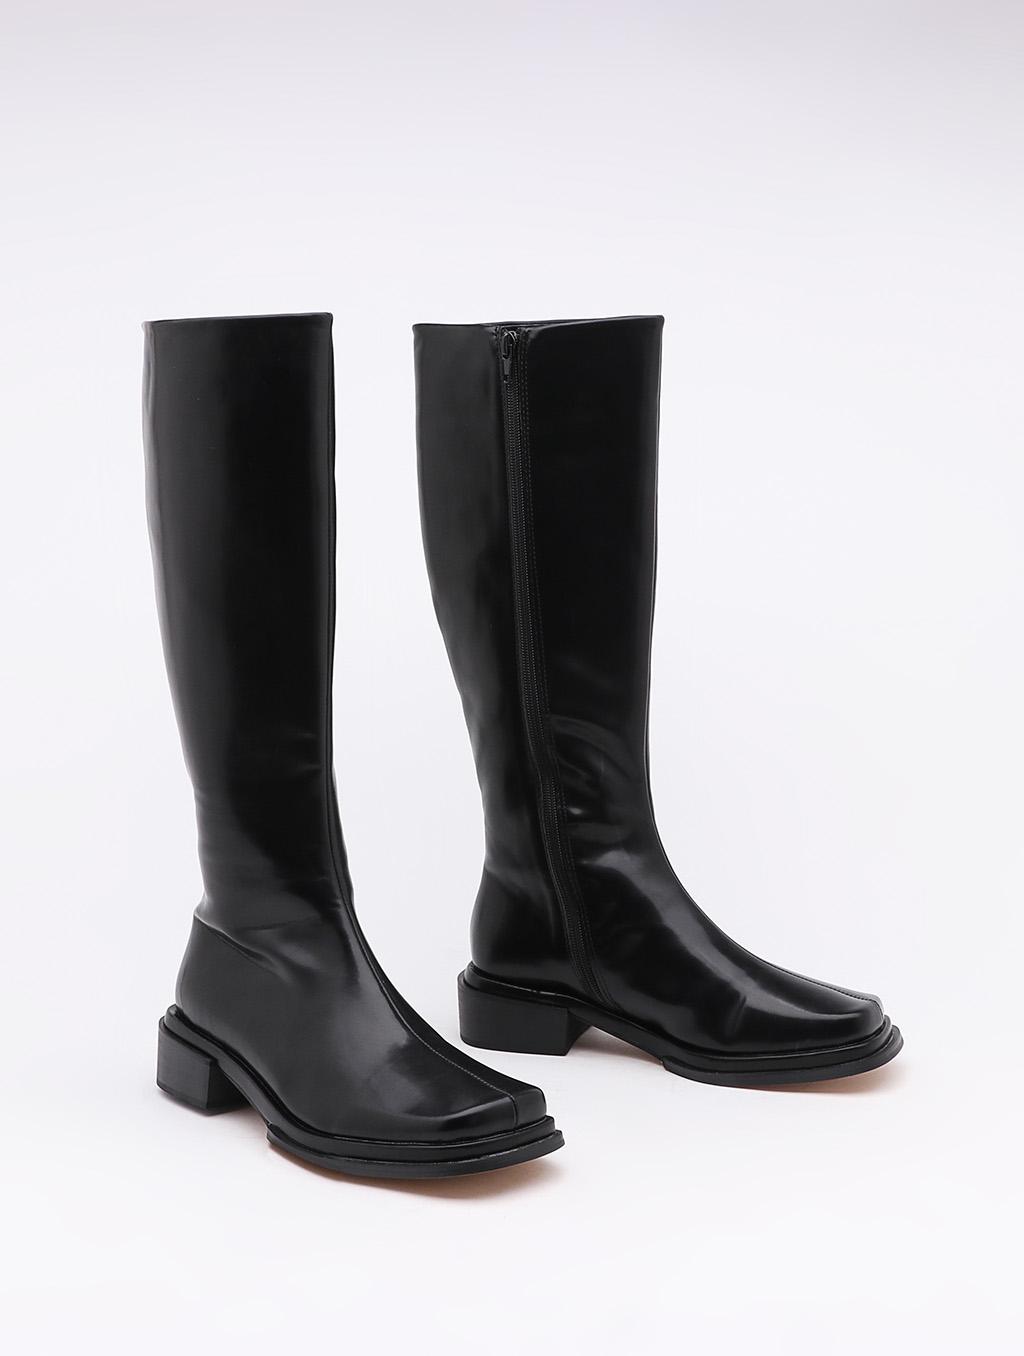 Lattelier Semi-square Knee-high Boots in Black | Lyst